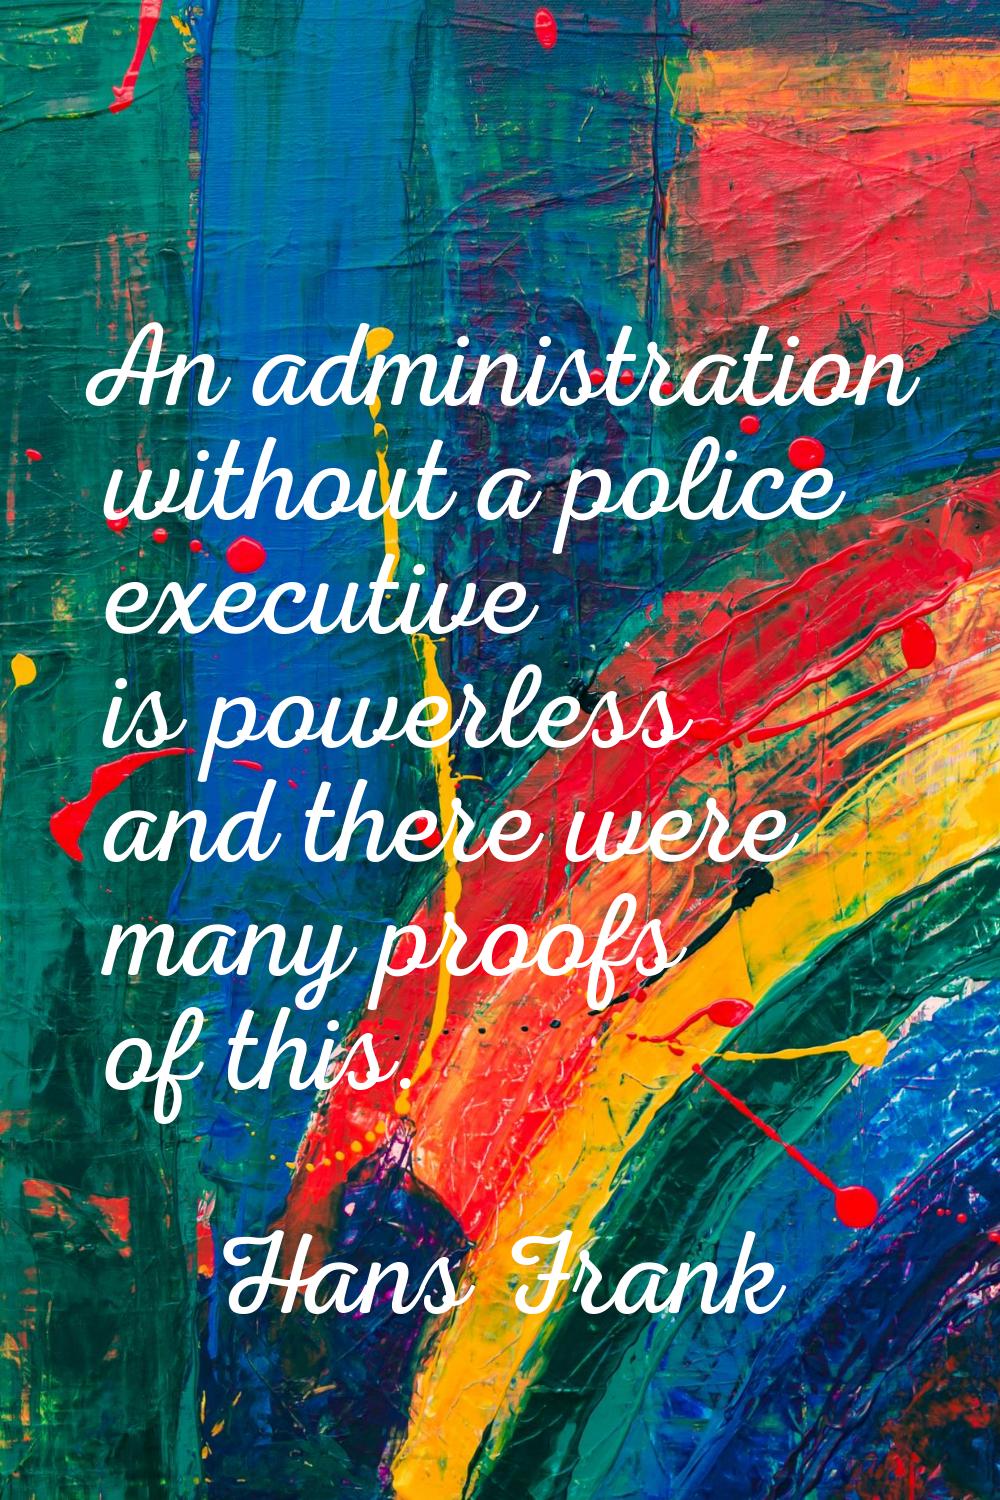 An administration without a police executive is powerless and there were many proofs of this.